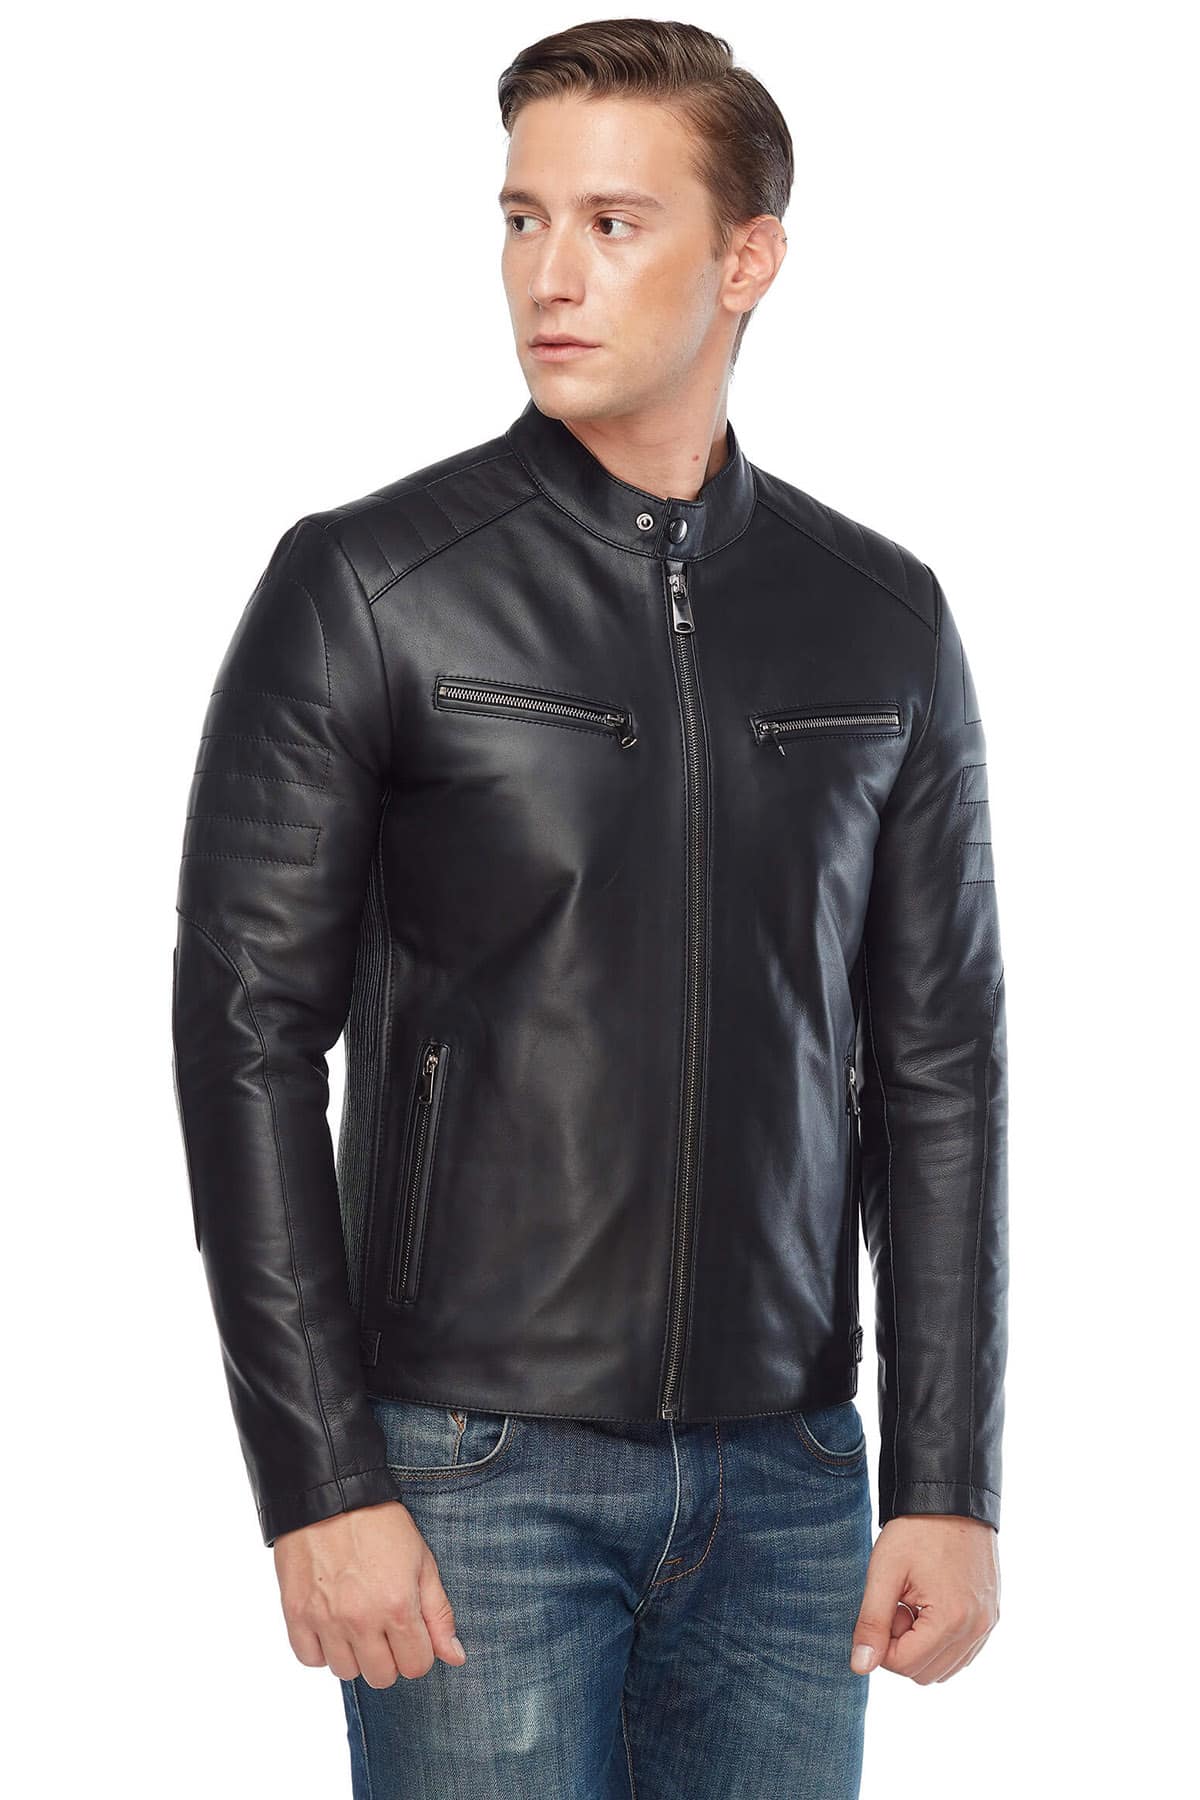 You've Searched for Mens Genuine Leather Jacket in Black